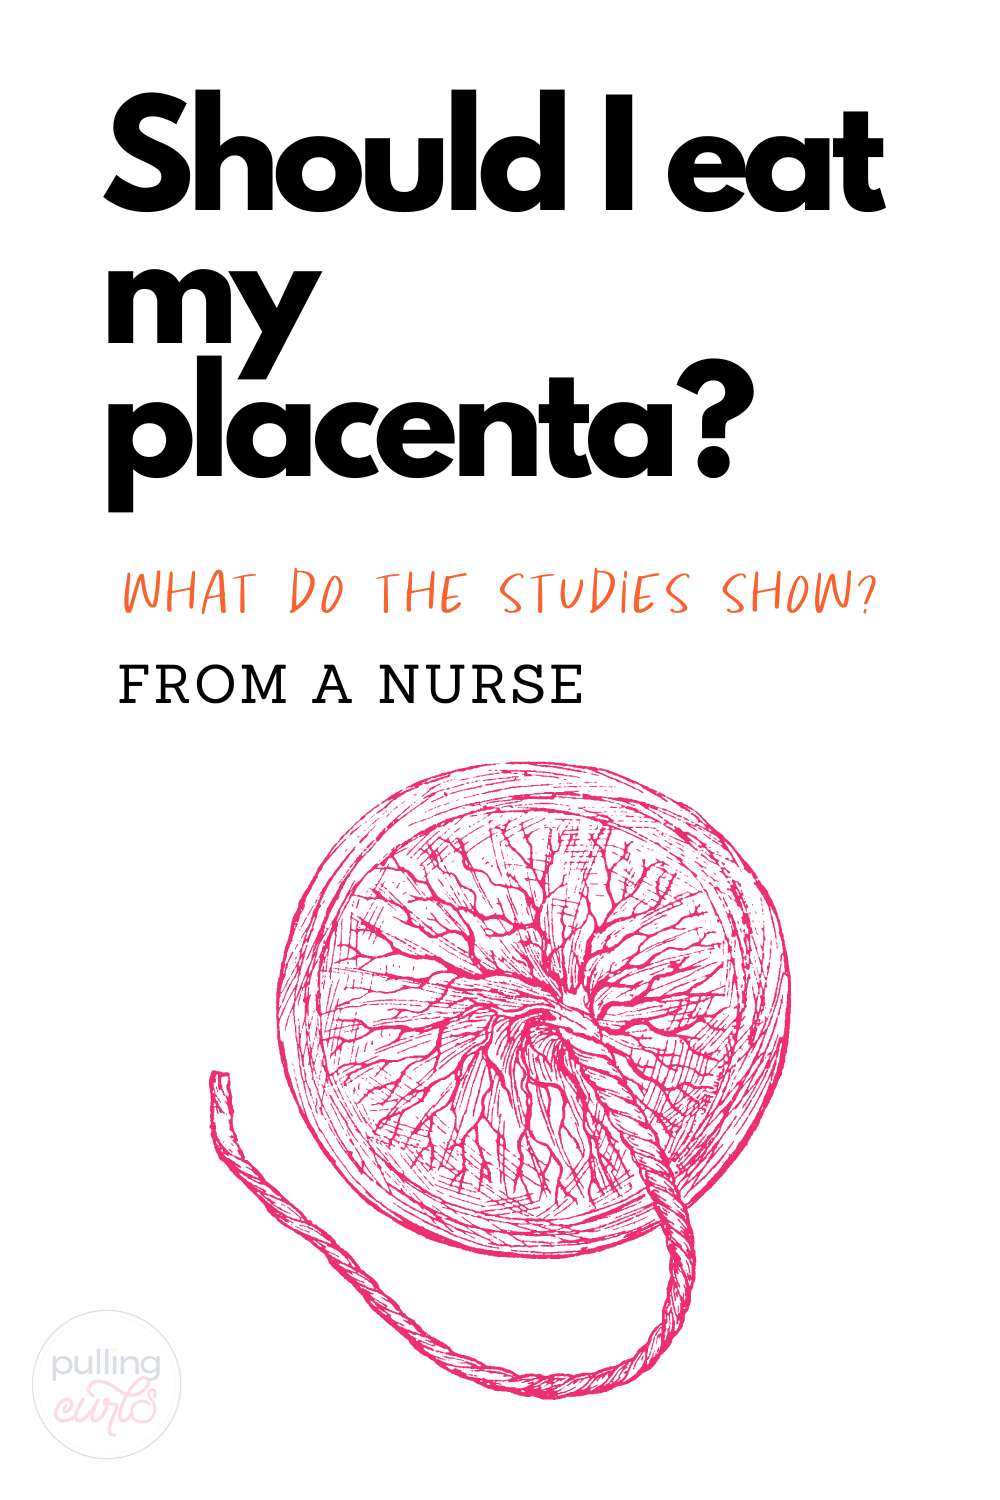 With prices ranging from $200-$500, is placenta encapsulation worth the investment? Explore the controversial debate and make an informed decision. via @pullingcurls